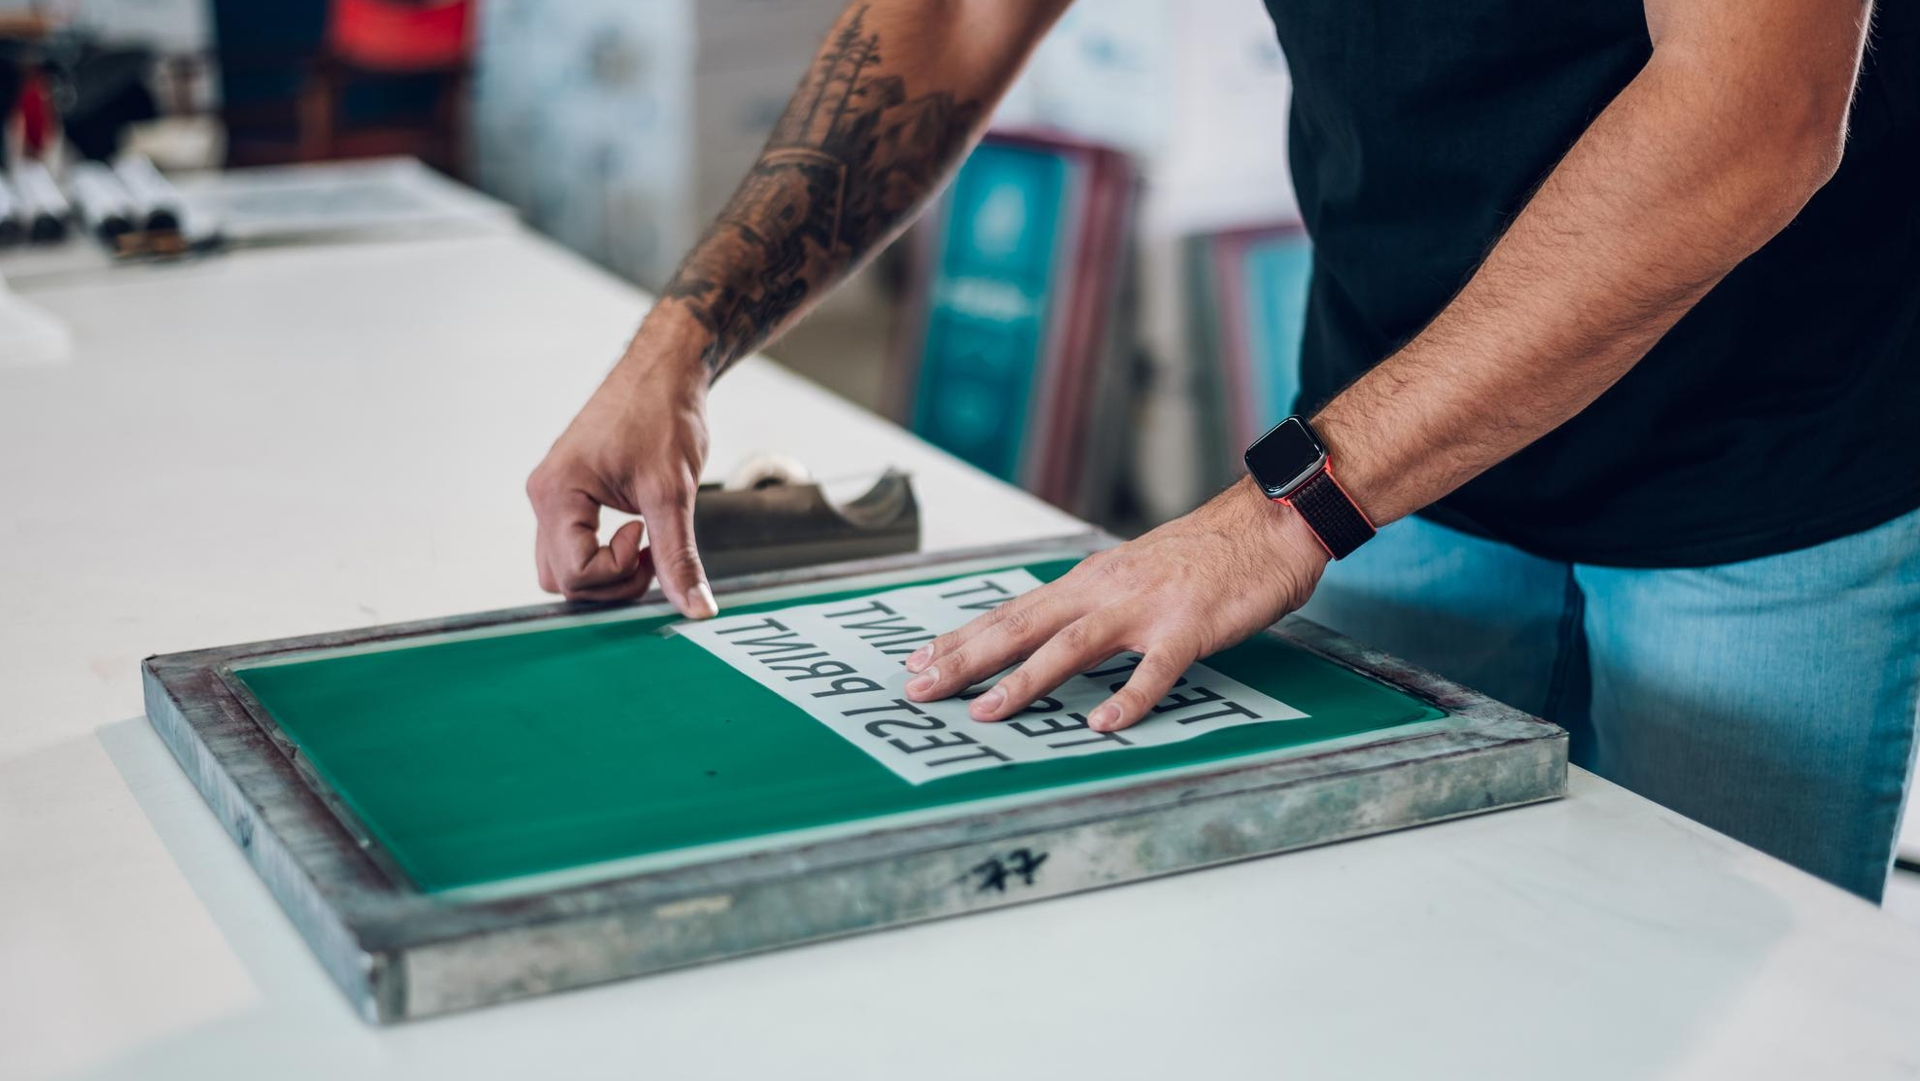 An in-depth guide to Screen Printing | Sticker it blog